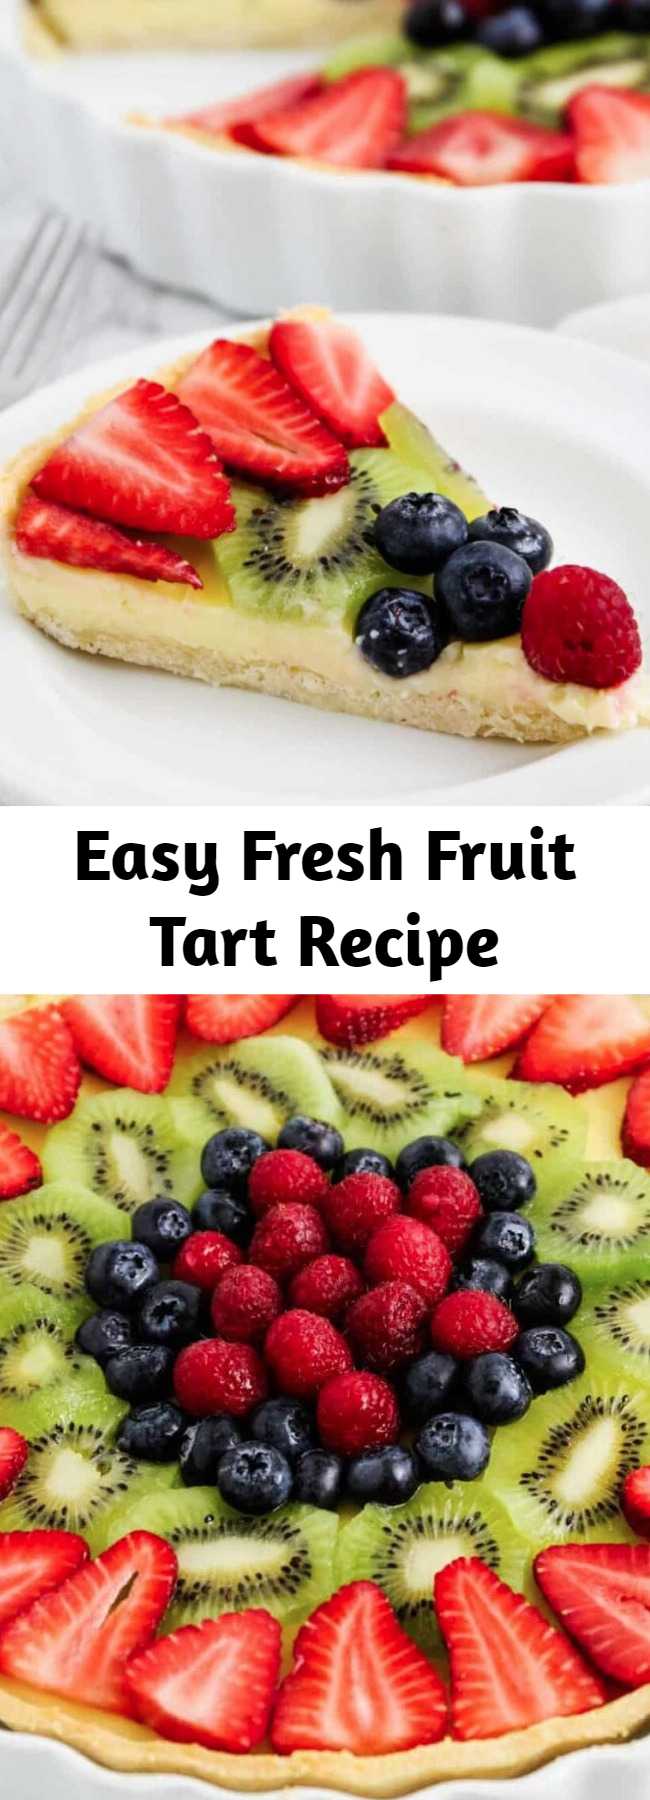 Easy Fresh Fruit Tart Recipe - Each bite of this fresh fruit tart is a mix of crumbly sweet crust, smooth and decadent custard and juicy fresh berries! This is the perfect refreshing treat for warmer weather!